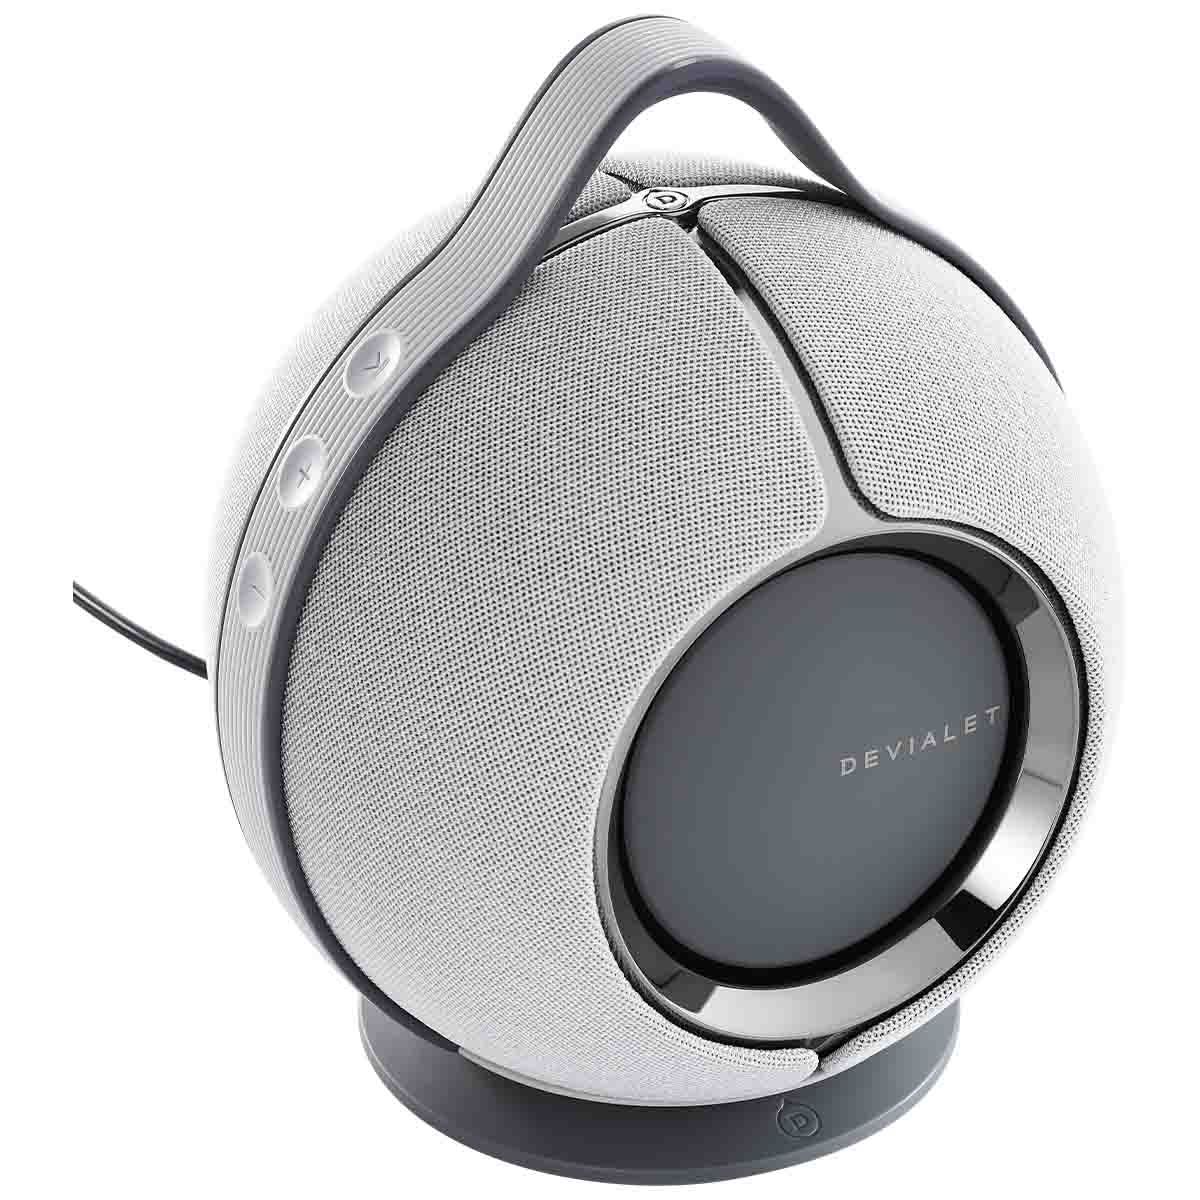 Devialet Mania on charging station